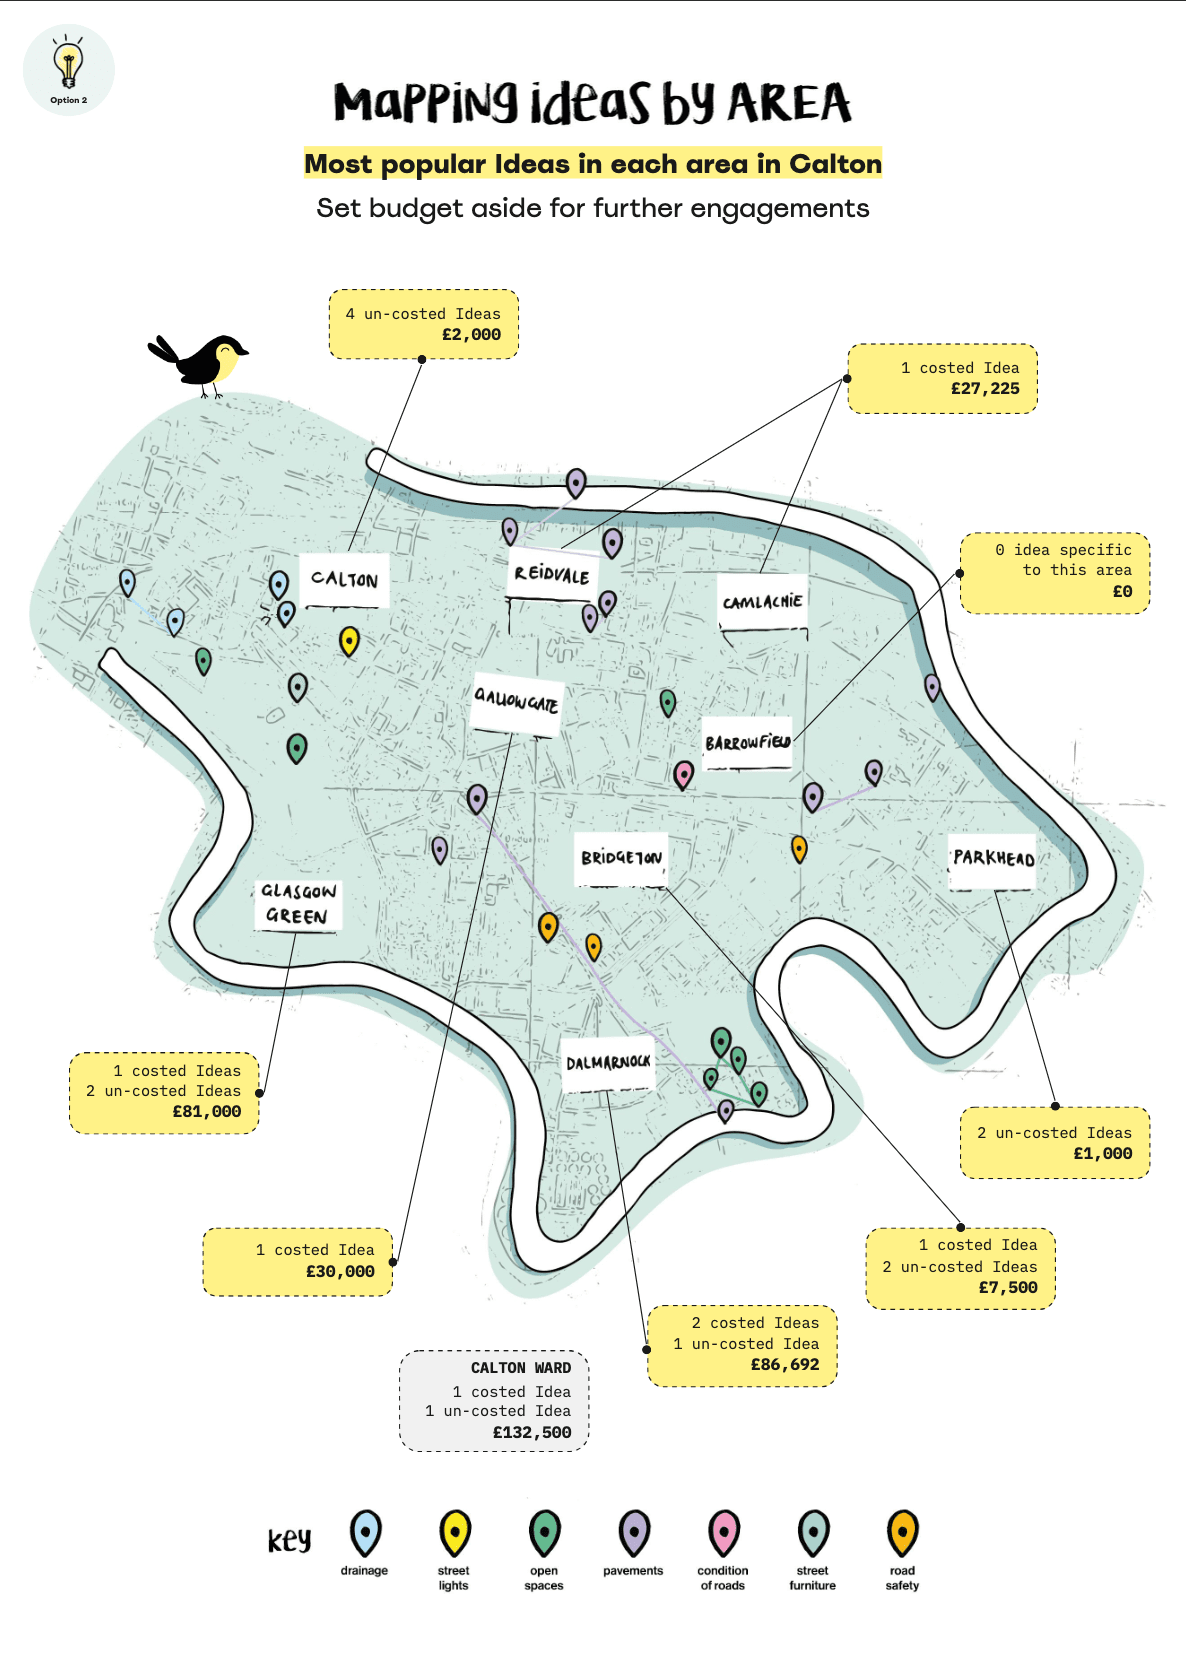 A map of where funded ideas are located in Calton. It shows that there are spread across the whole of Calton